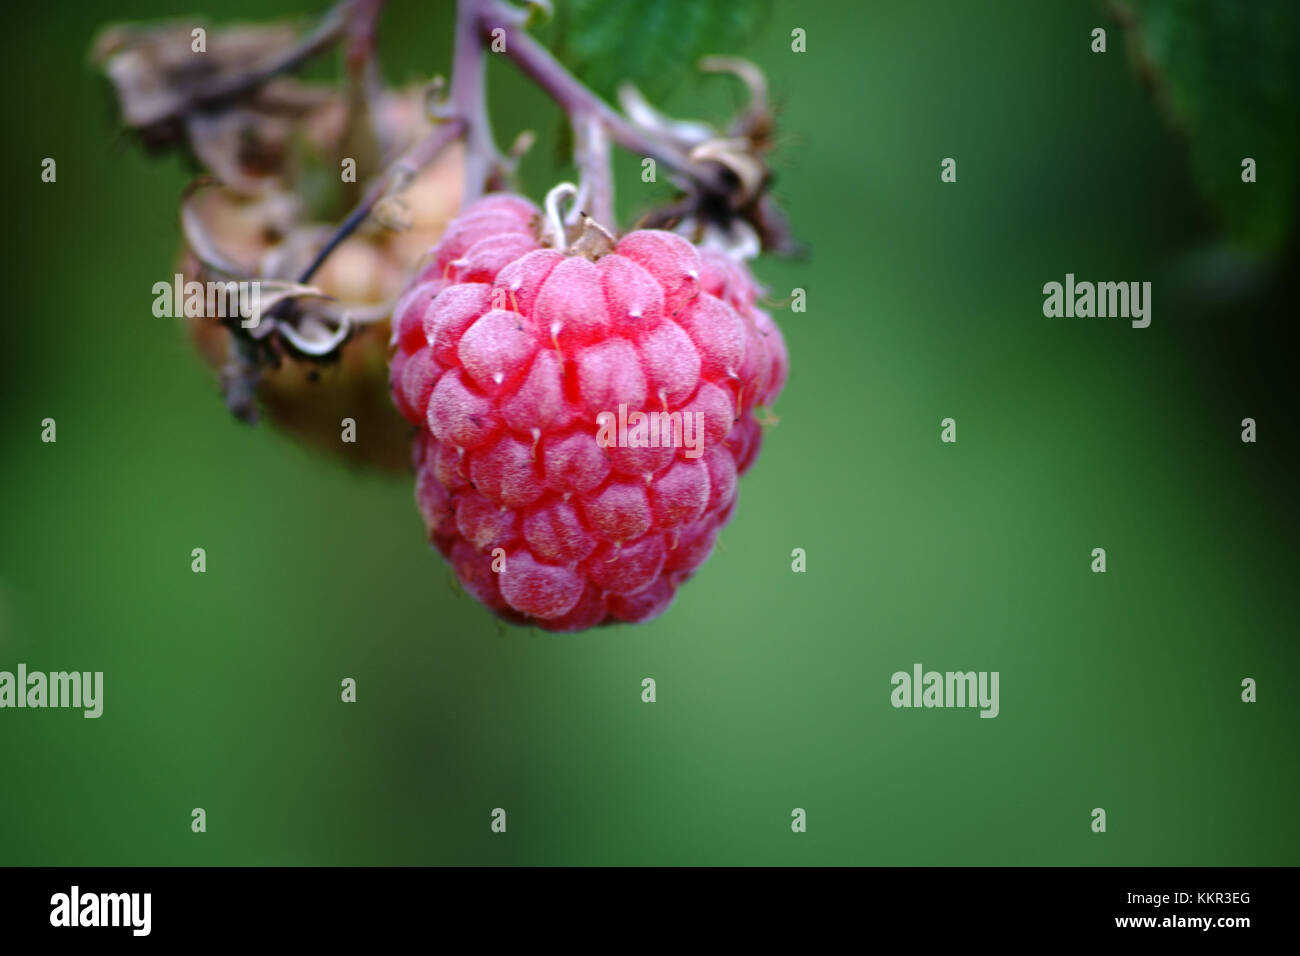 Close-up of a bulging and ripe red raspberry hanging on a raspberry shrub. Stock Photo